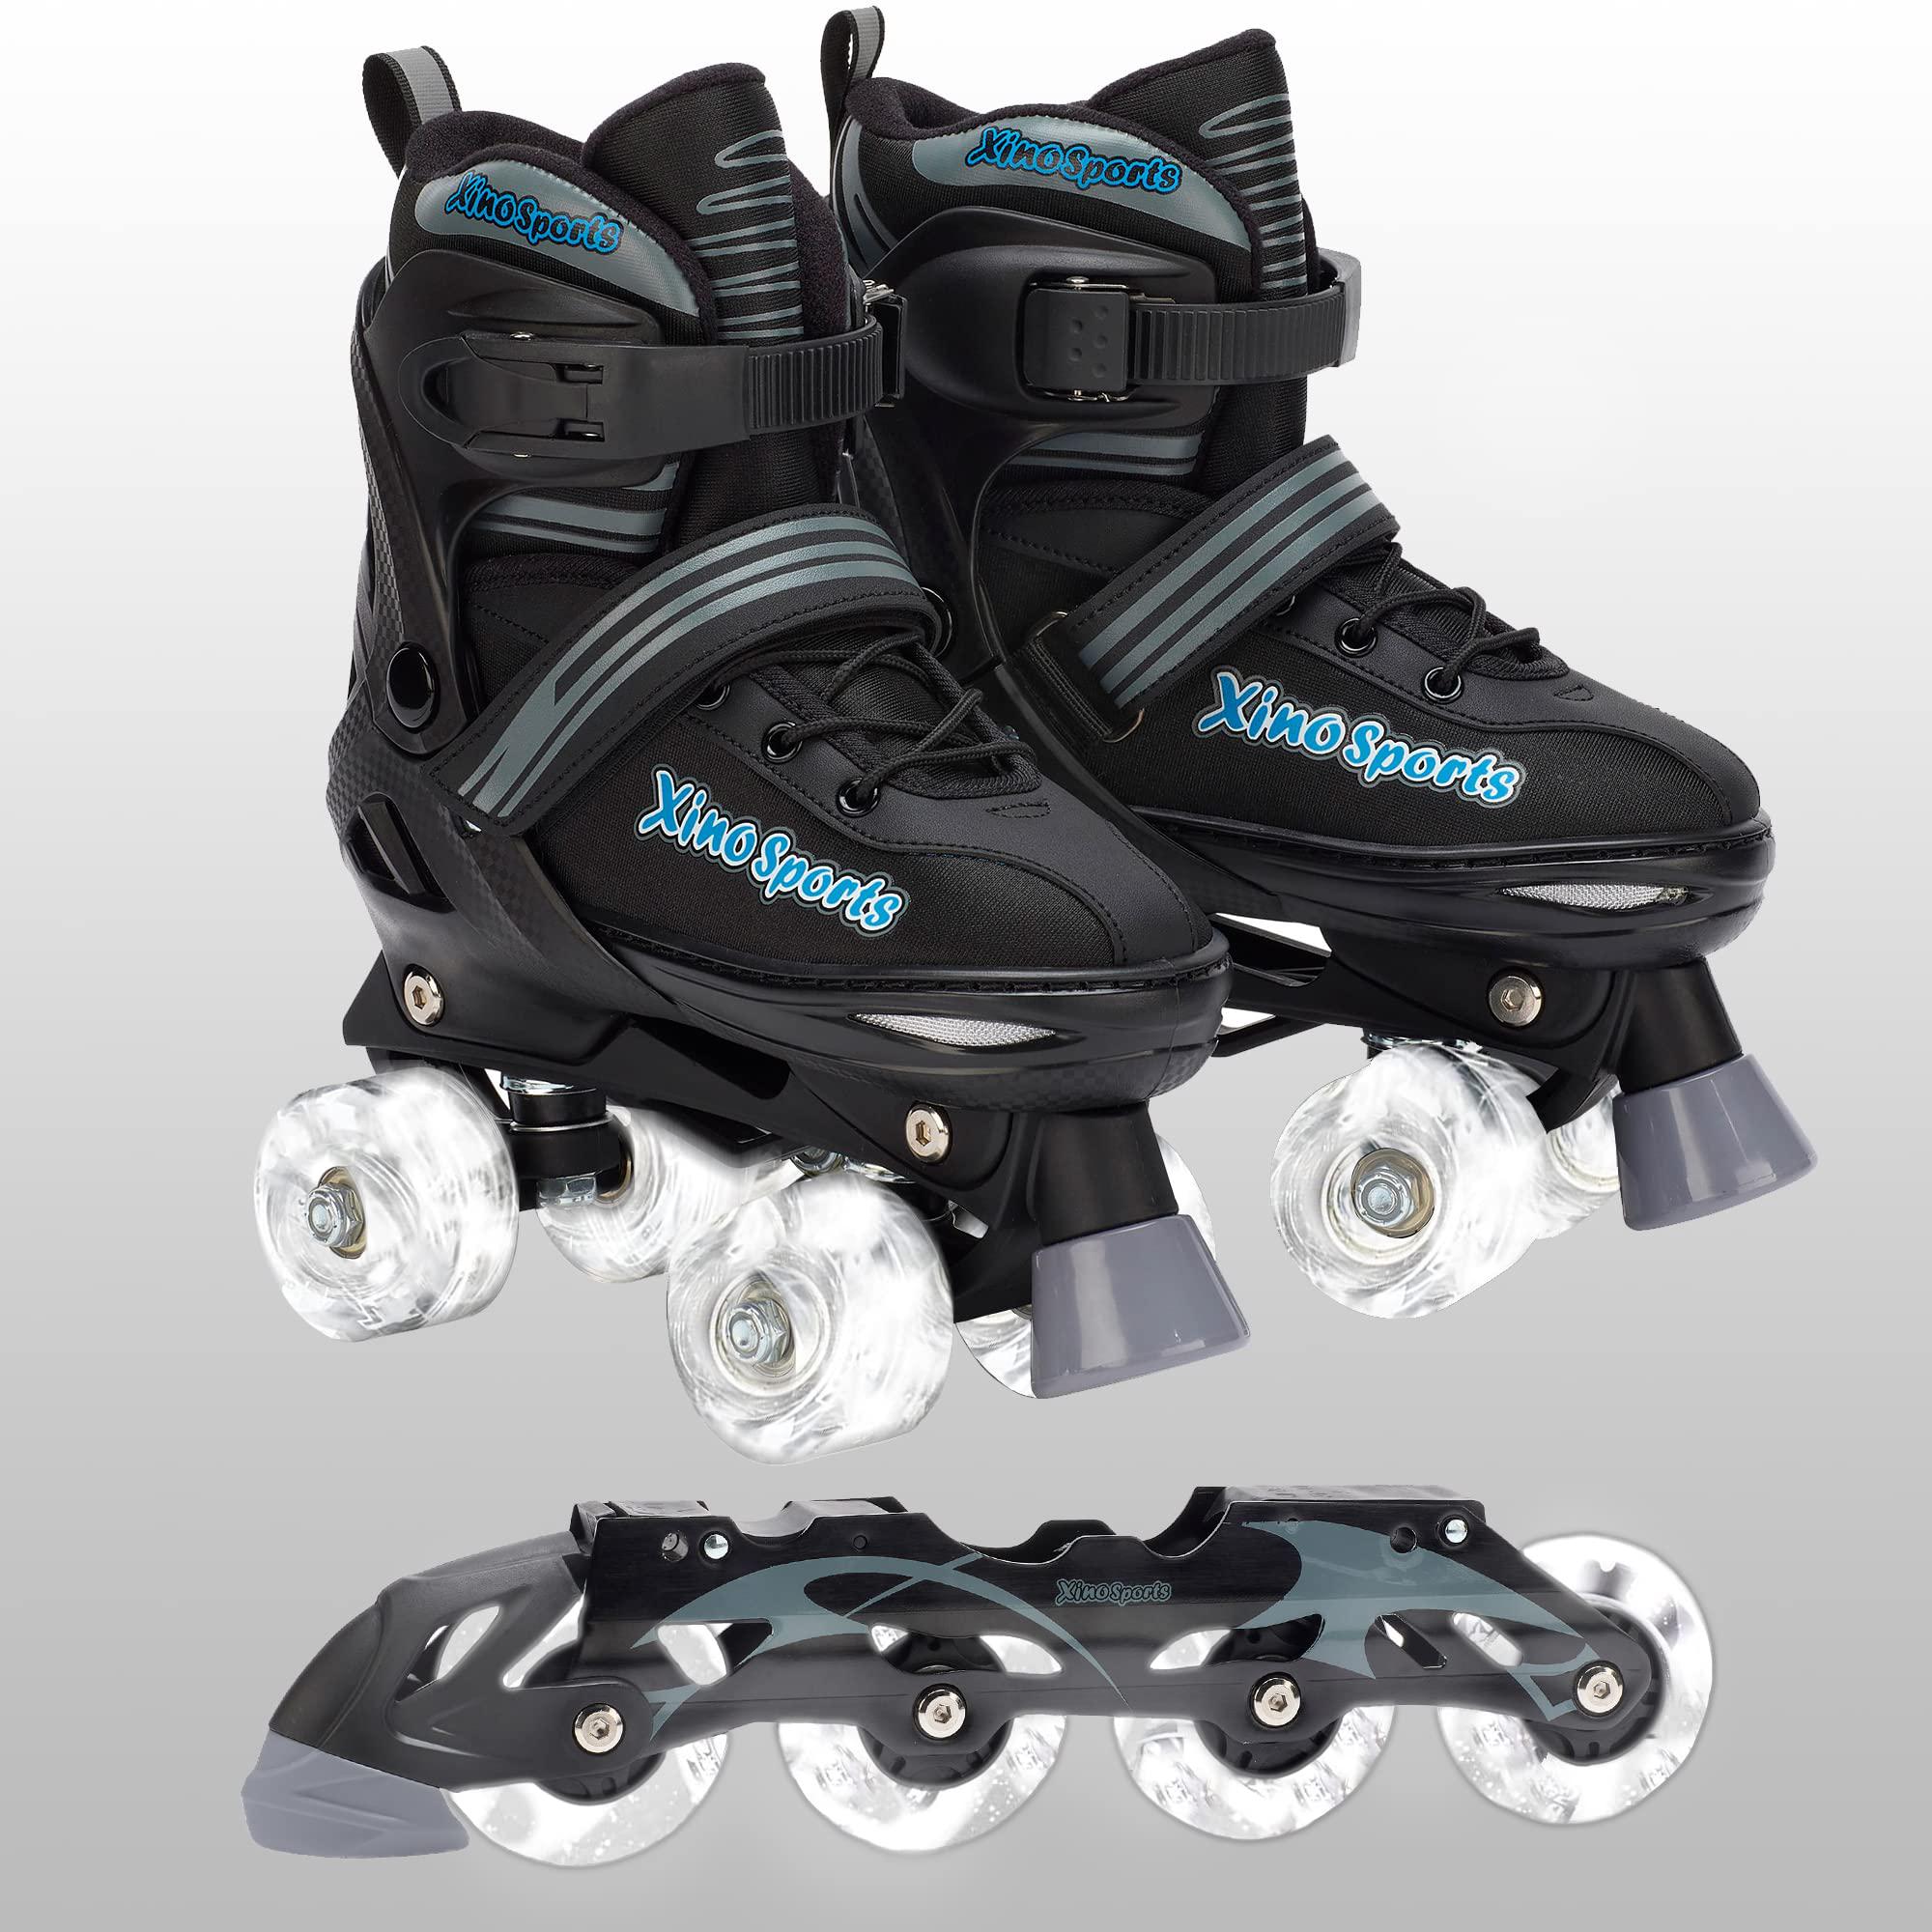 xino sports 2 in 1 combo, kids roller skates and roller blades - interchangeable led light up skates for kids ages 6-12, teen